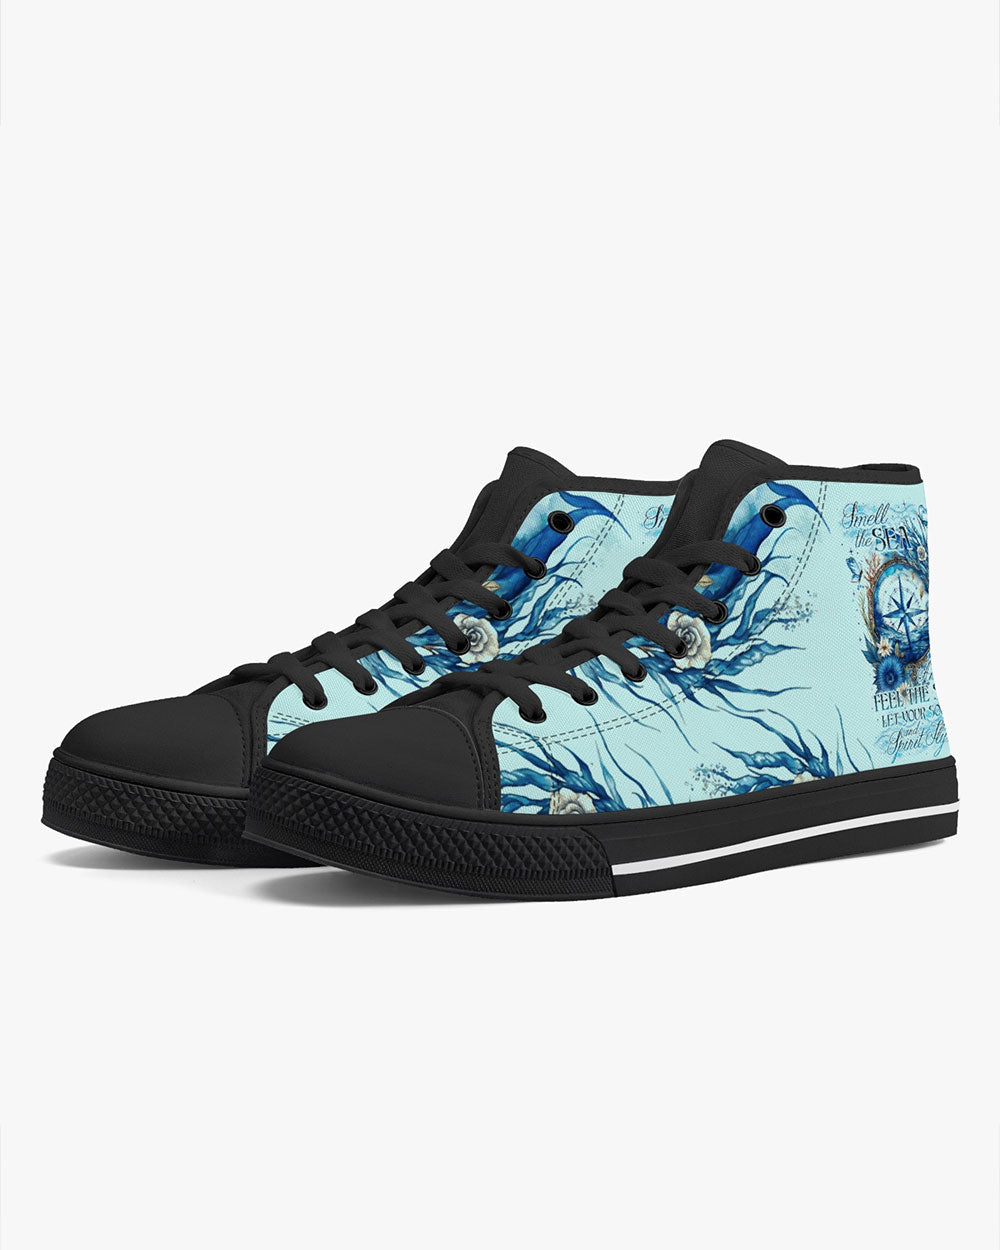 SMELL THE SEA AND FEEL THE SKY HIGH TOP CANVAS SHOES - TY2305234